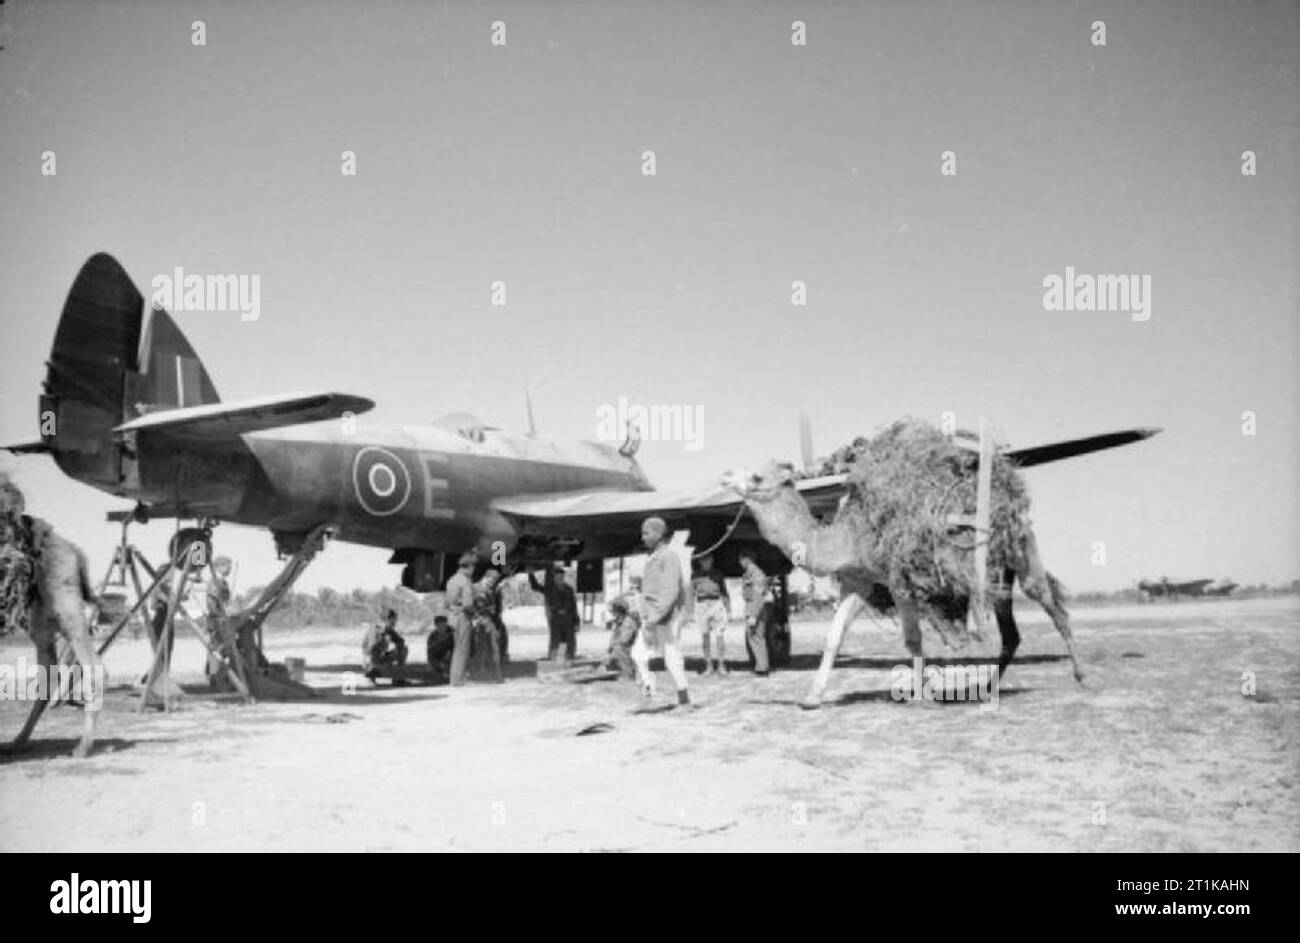 Royal Air Force Operations in the Middle East and North Africa, 1939-1943. Local Arabs and their camels pass by Bristol Beaufighter Mark VIF, X8166 'E', raised by its tail while undergoing gun maintenance and harmonisation at Castel Benito, Libya. Stock Photo